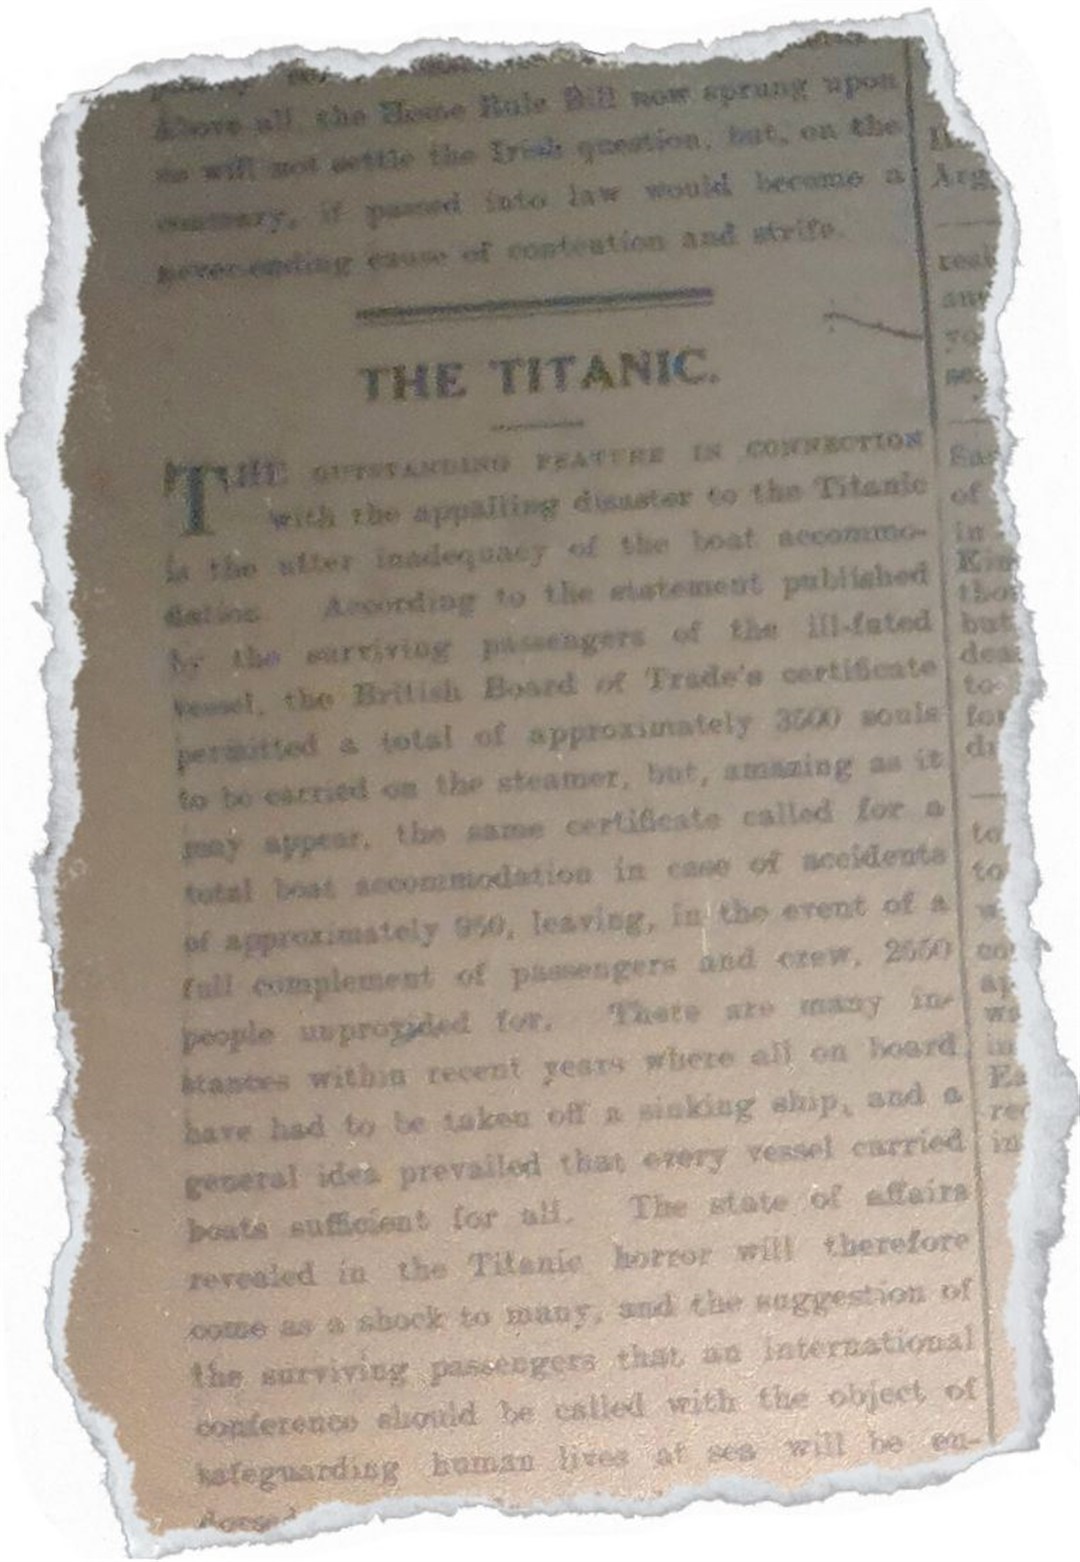 A 1912 Northern Scot article argues for improvements to ship safety after the Titanic disaster...Picture: Northern Scot Archive